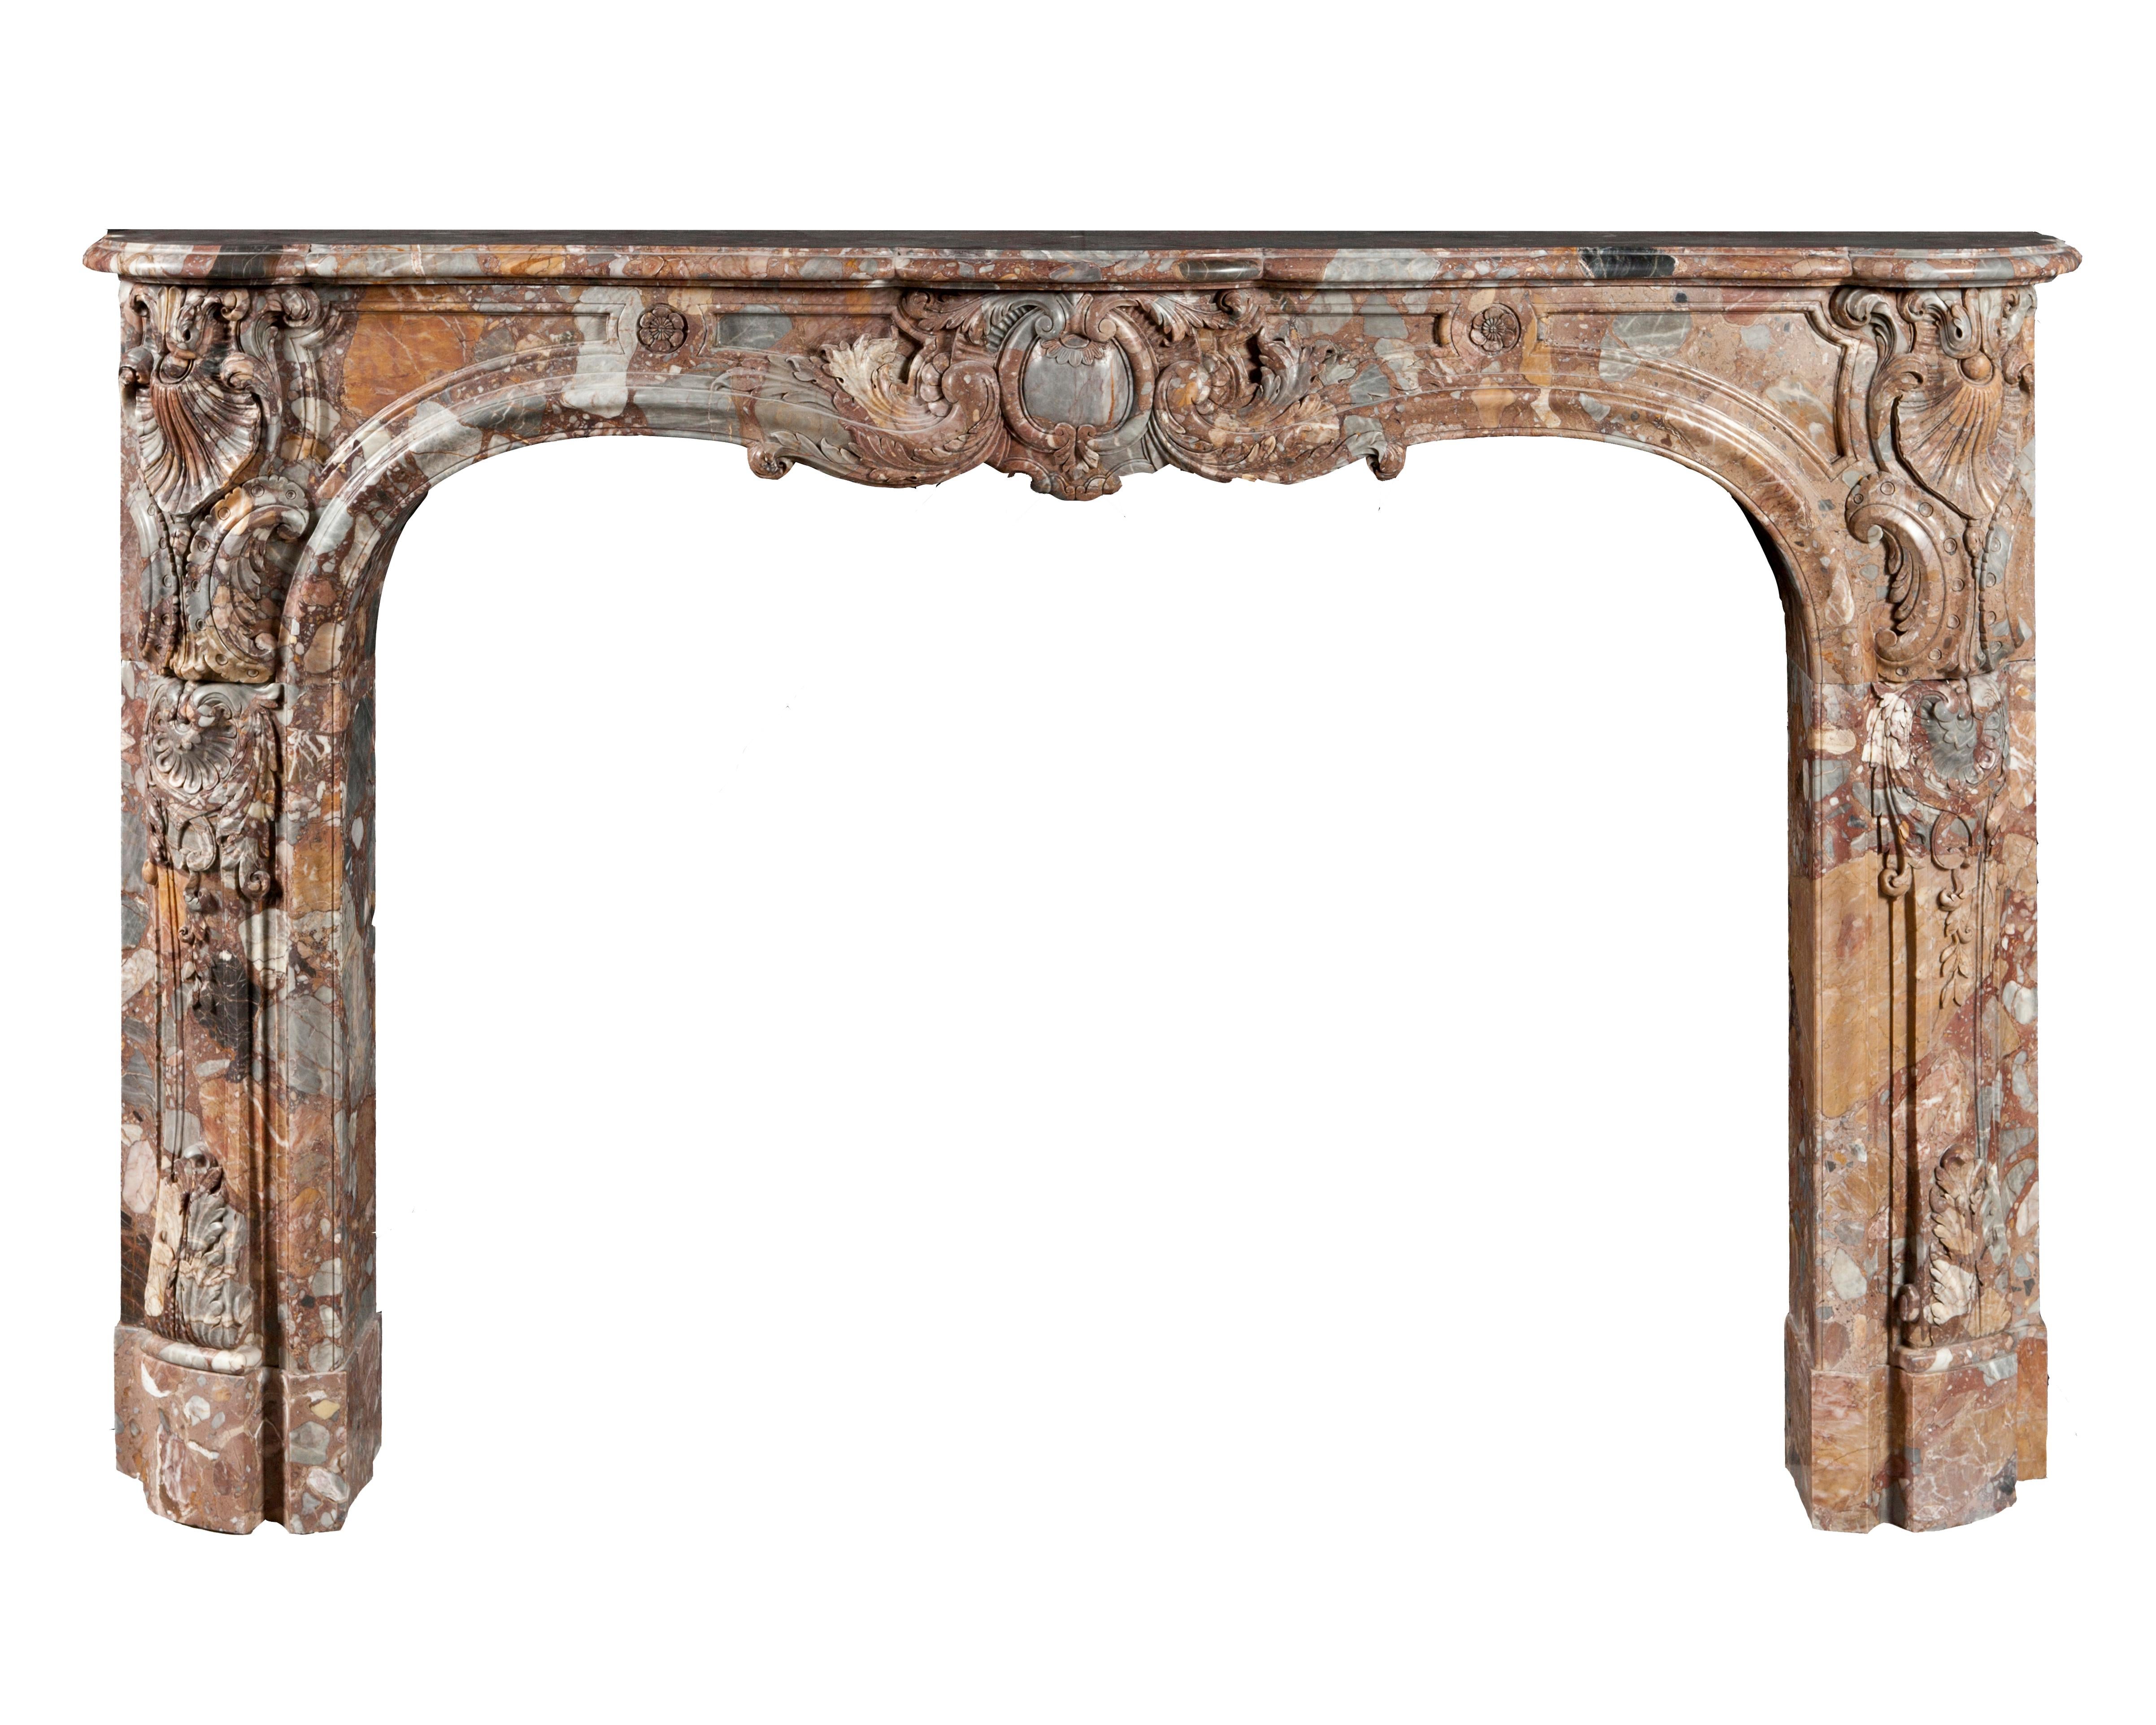 Original reproduction of the 18th century French marble fireplace coming from the dining room of the « Chateau de Balleroy » , Louis XV style.